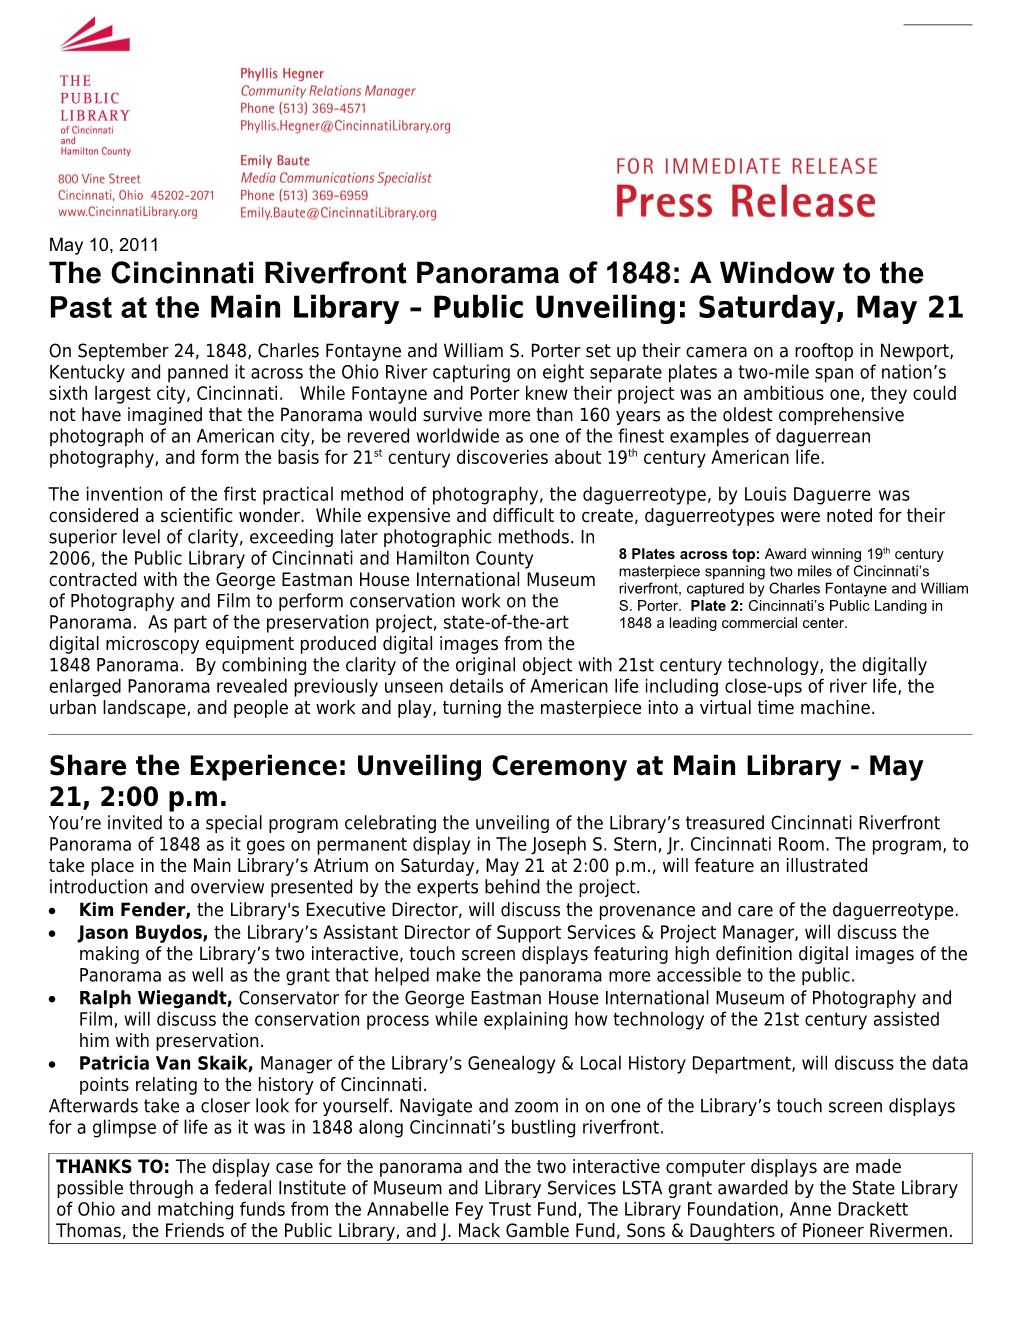 Share the Experience: Unveiling Ceremony at Main Library - May 21, 2:00 P.M